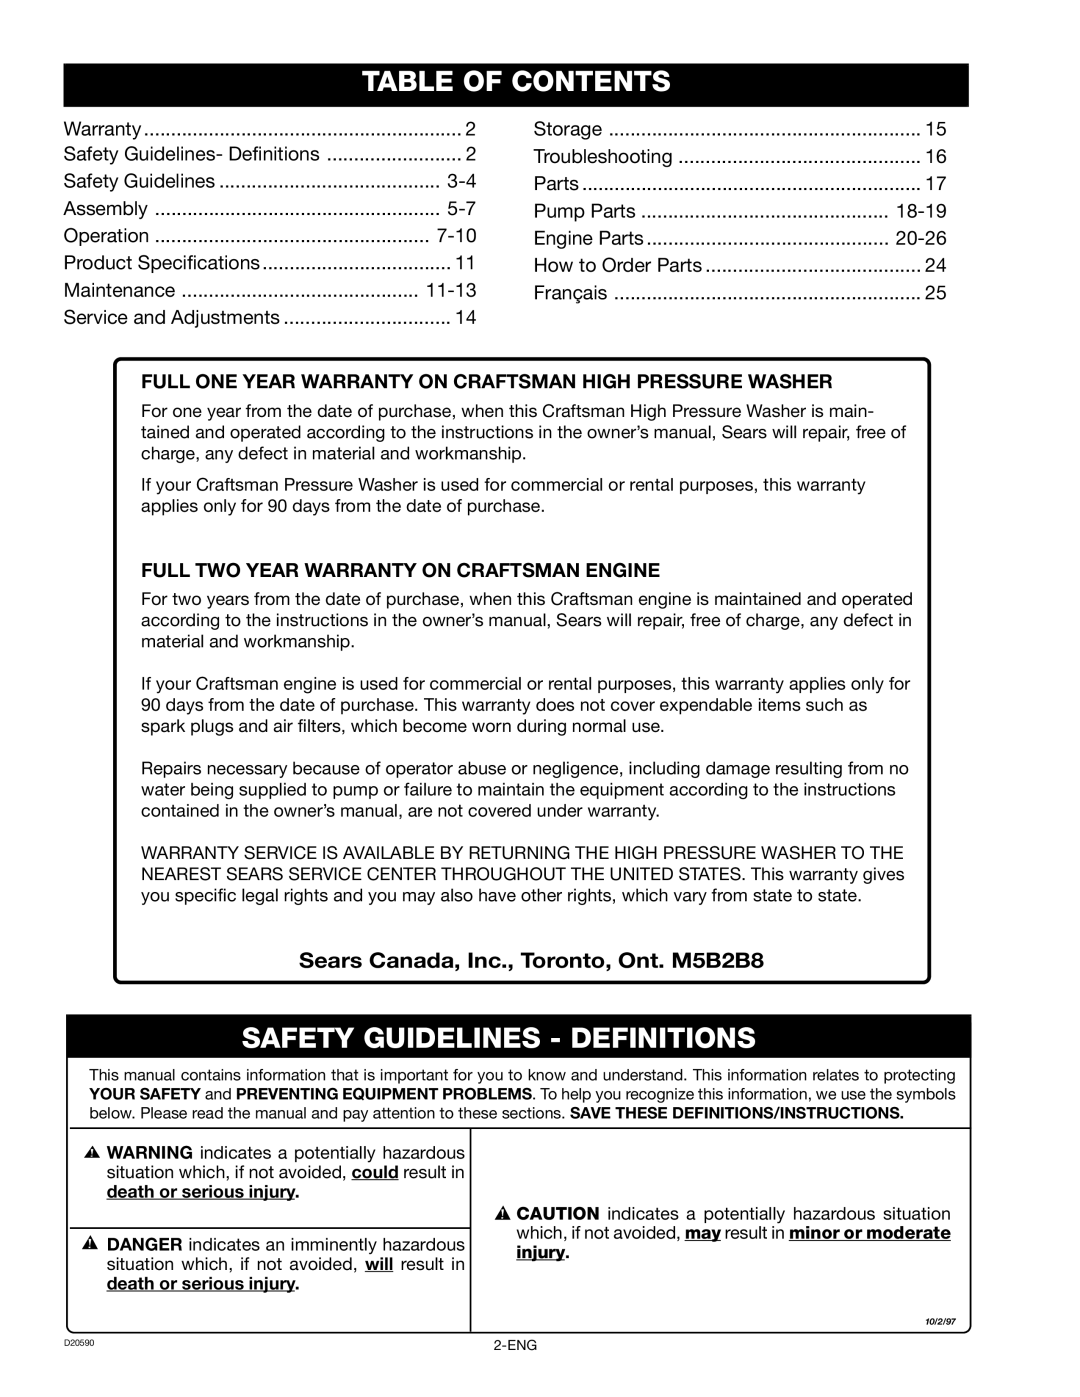 Craftsman 919.670280, D20590 Table Of Contents, Safety Guidelines - Definitions, Sears Canada, Inc., Toronto, Ont. M5B2B8 